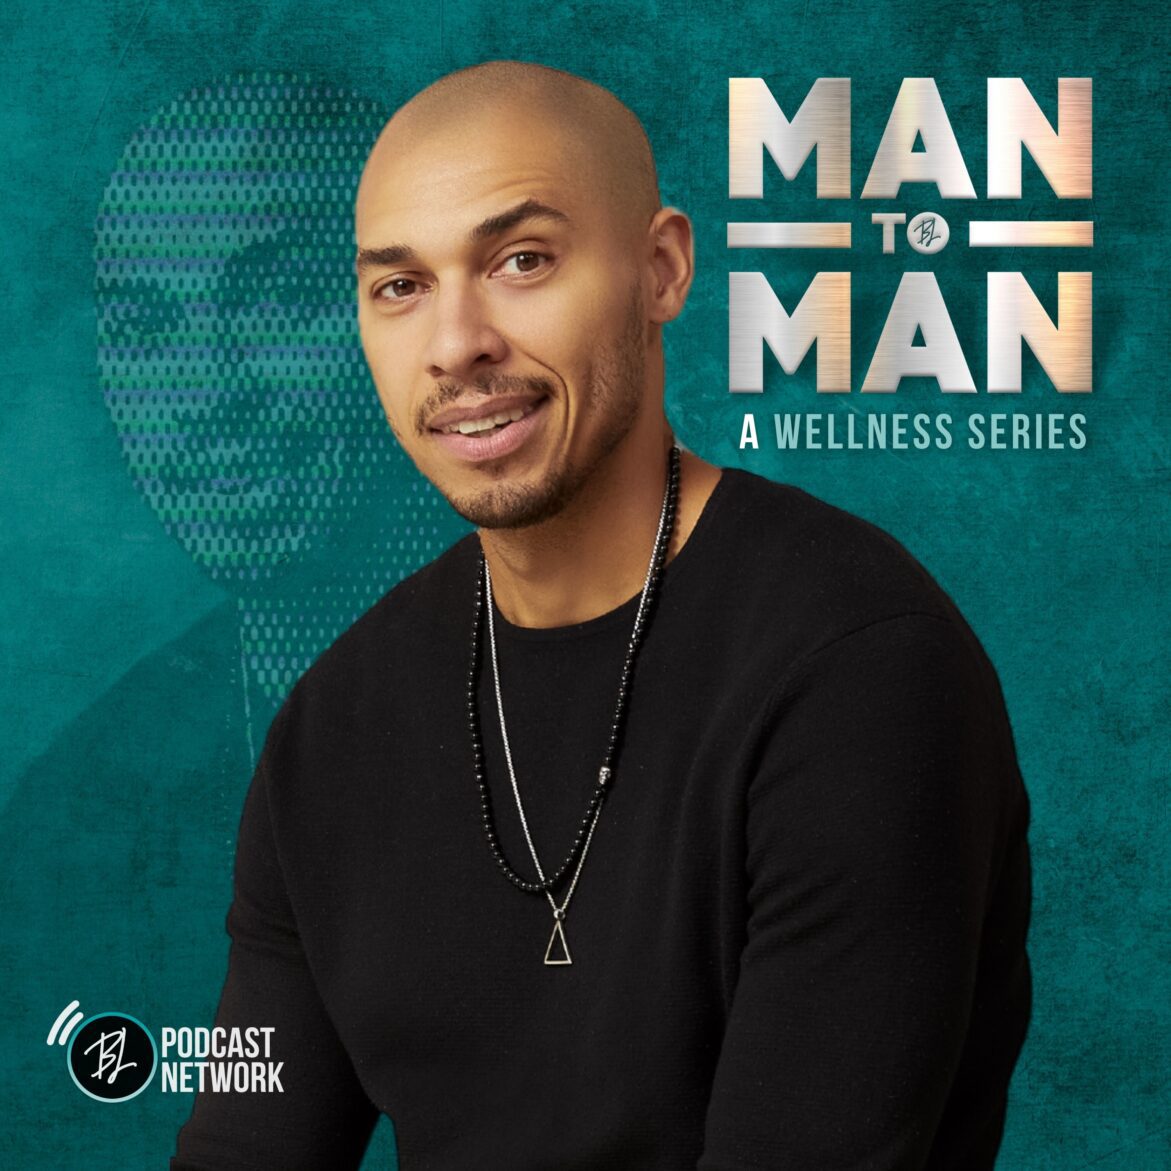 Black Podcasting - Man to Man with Jermaine Fowler